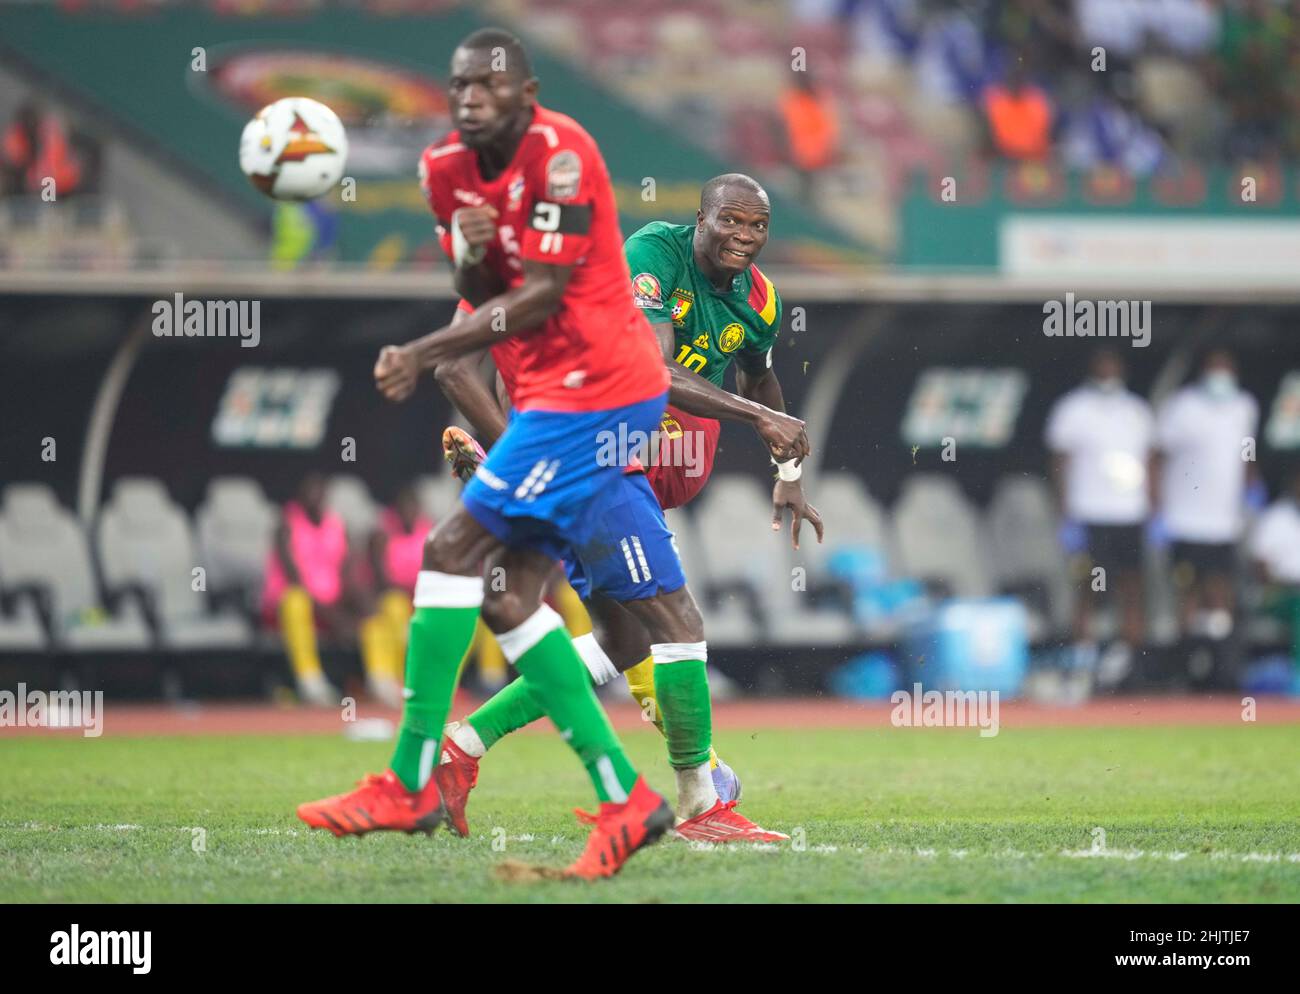 Douala, Cameroon, January, 29, 2022: Vincent Aboubakar of Cameroon during Cameroon versus The Gambia, Africa Cup of Nations at Japoma stadium. Kim Price/CSM. Stock Photo